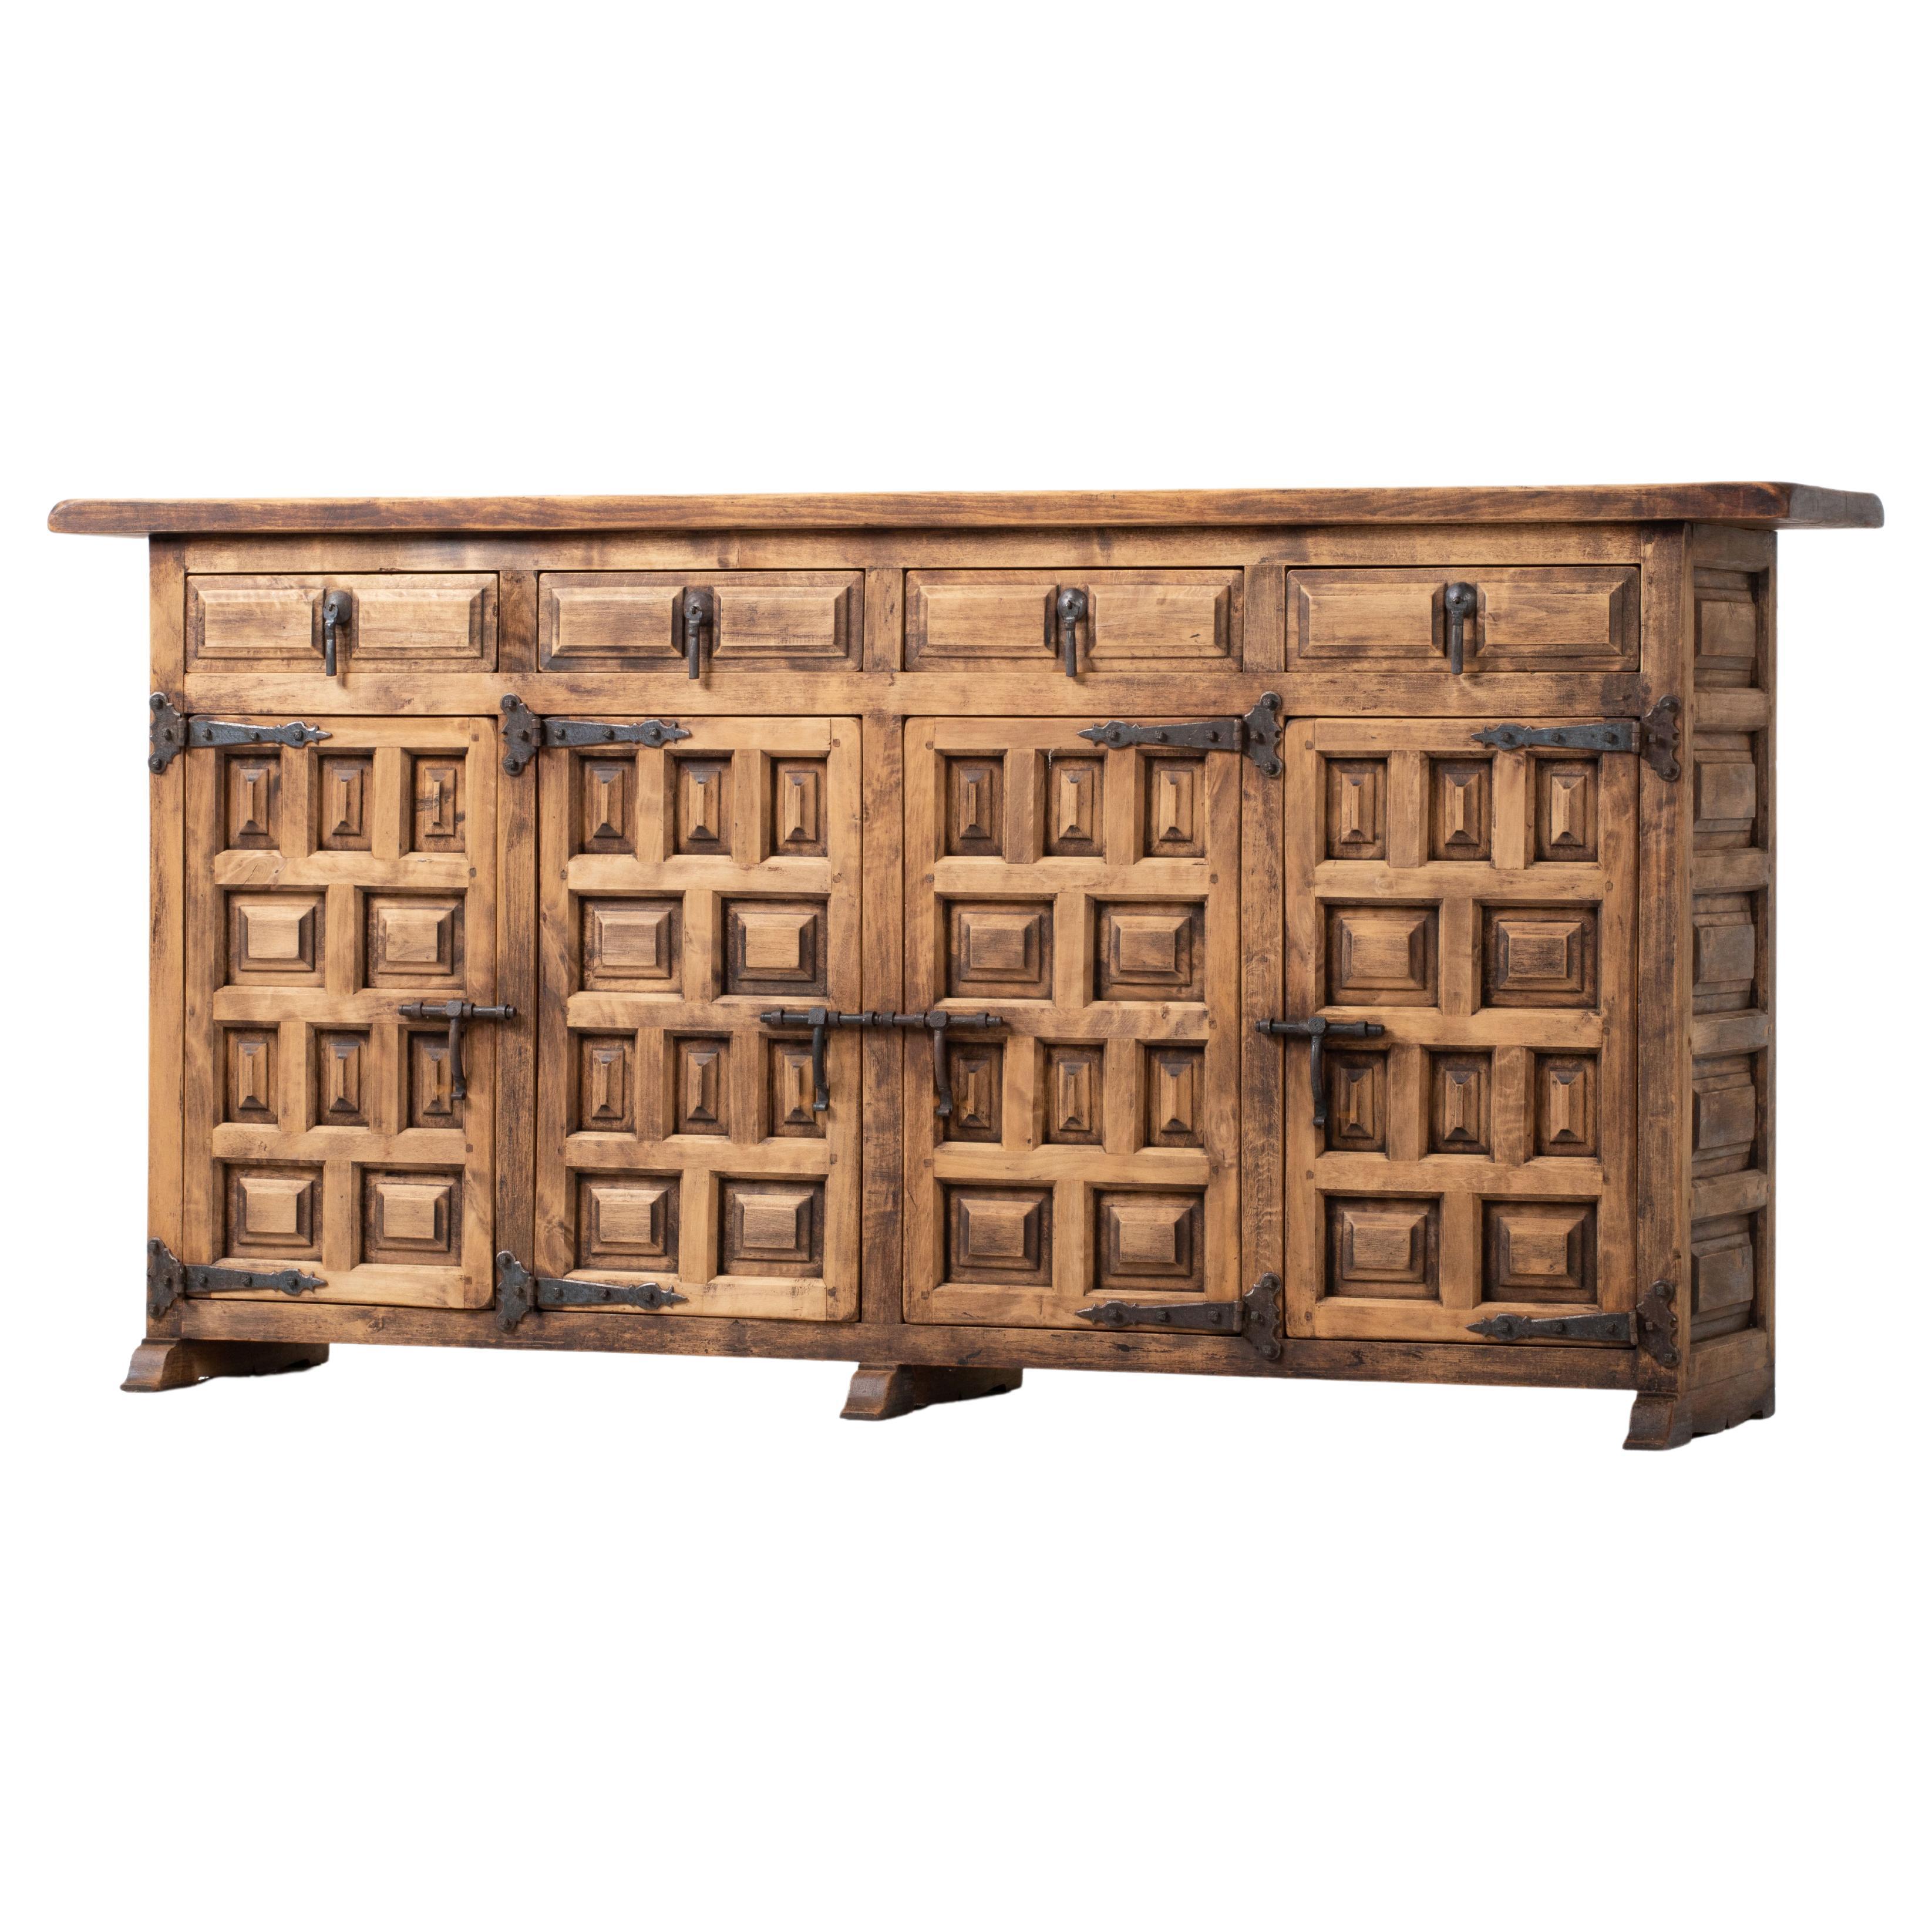 19th Catalan Spanish Baroque Carved Walnut Tuscan Credenza or Buffet